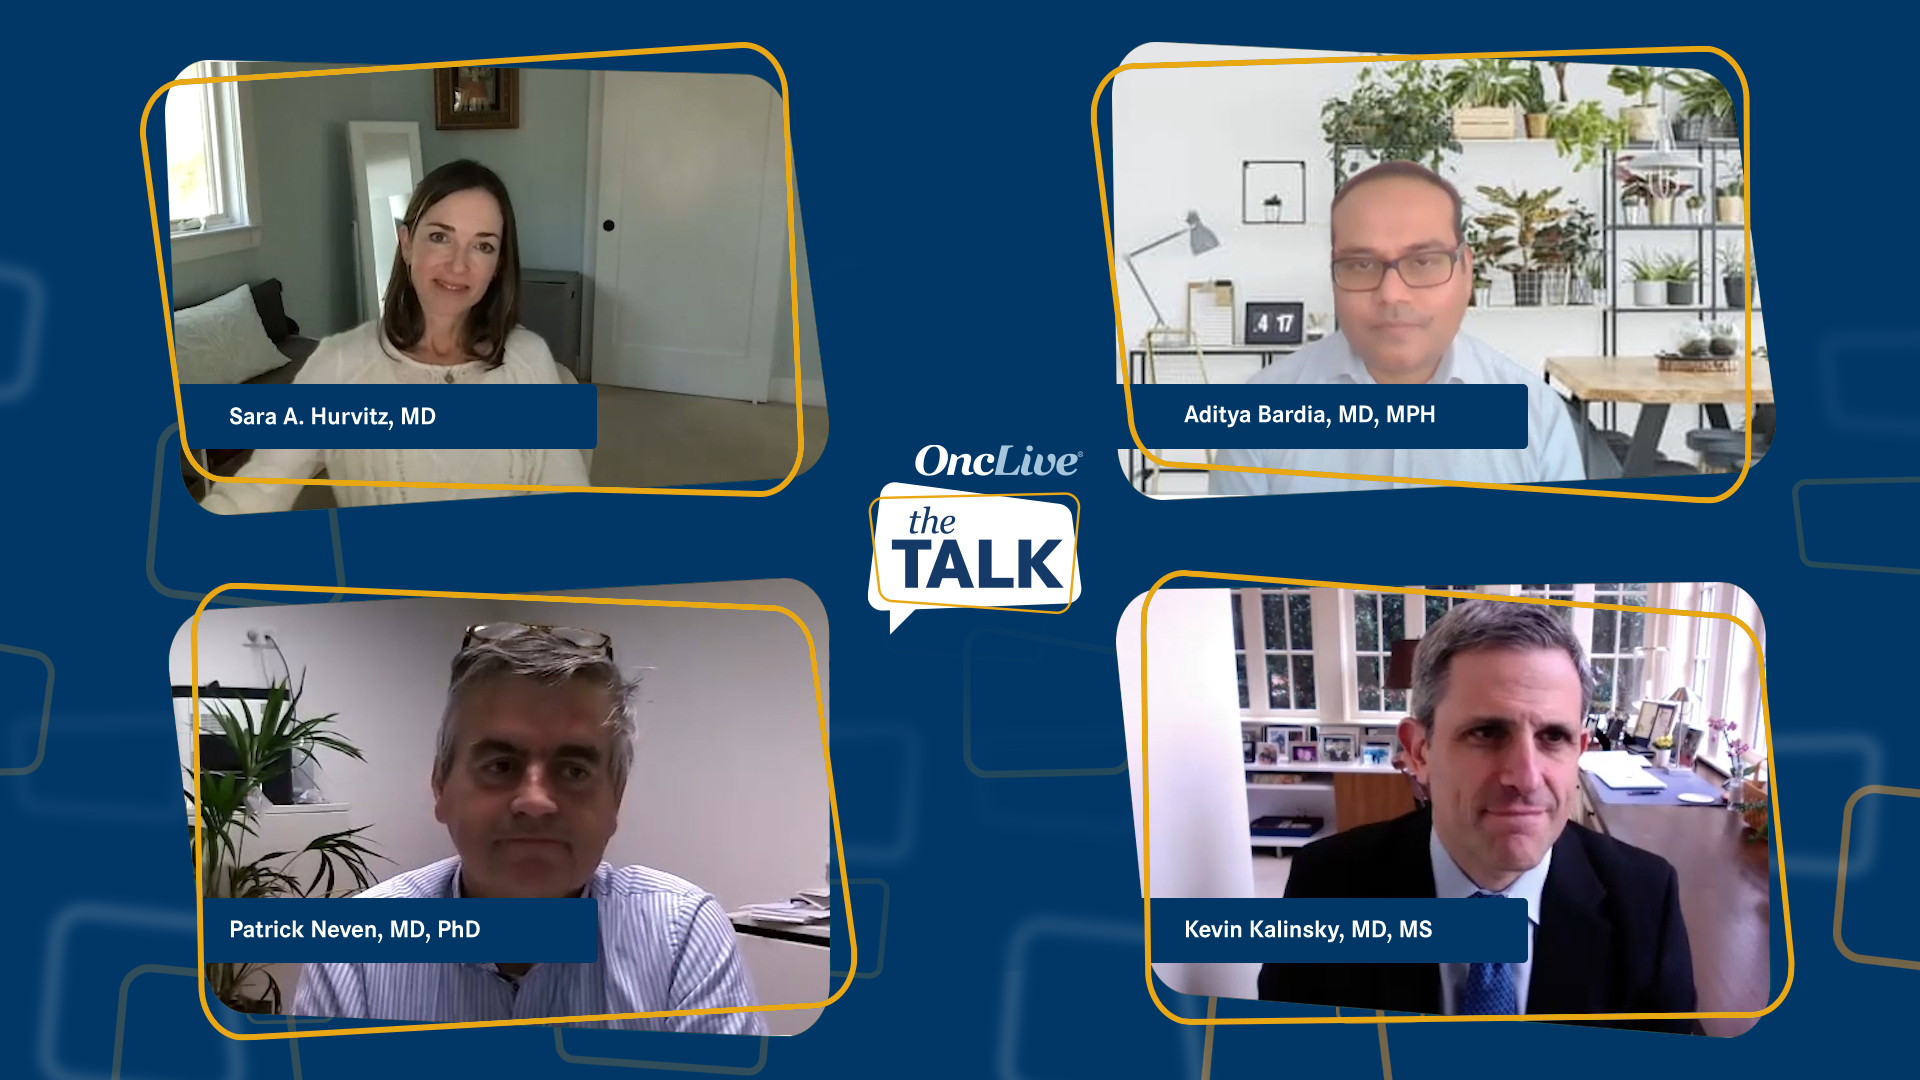 THE TALK: Breast Cancer, A Review of Data from the SABCS 2021 Virtual Meeting